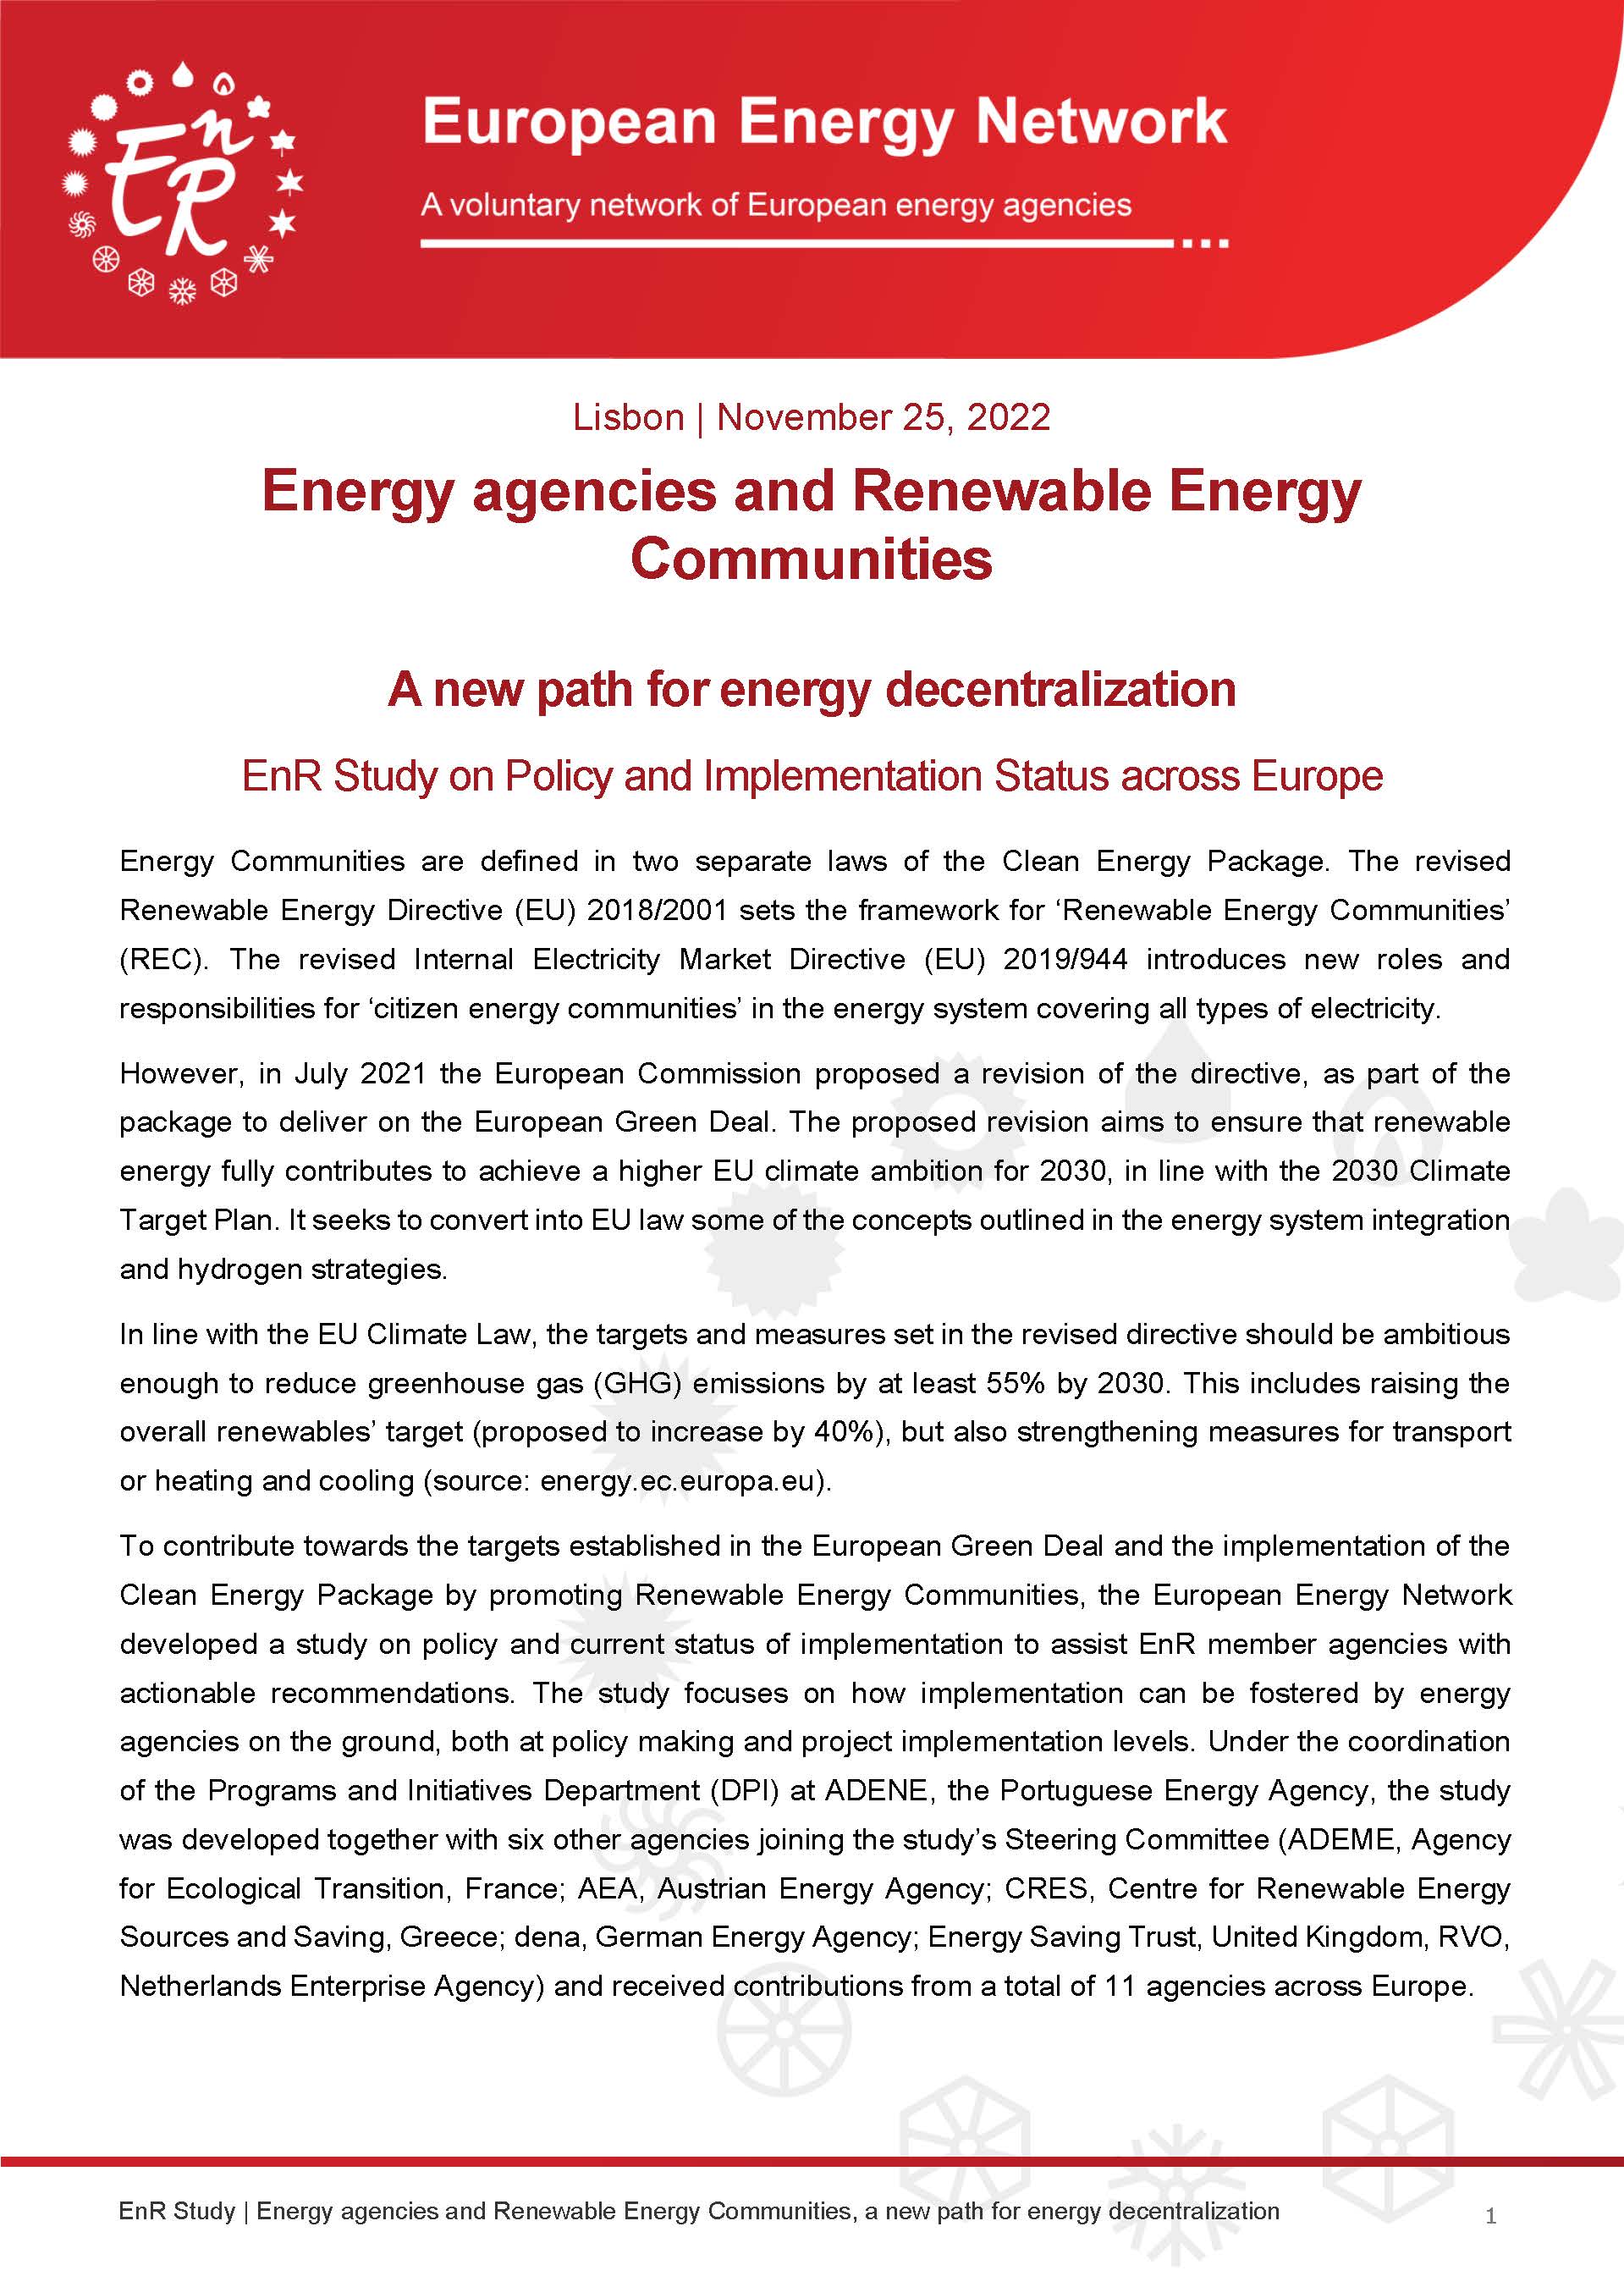 Energy agencies and Renewable Energy Communities. A new path for energy decentralization